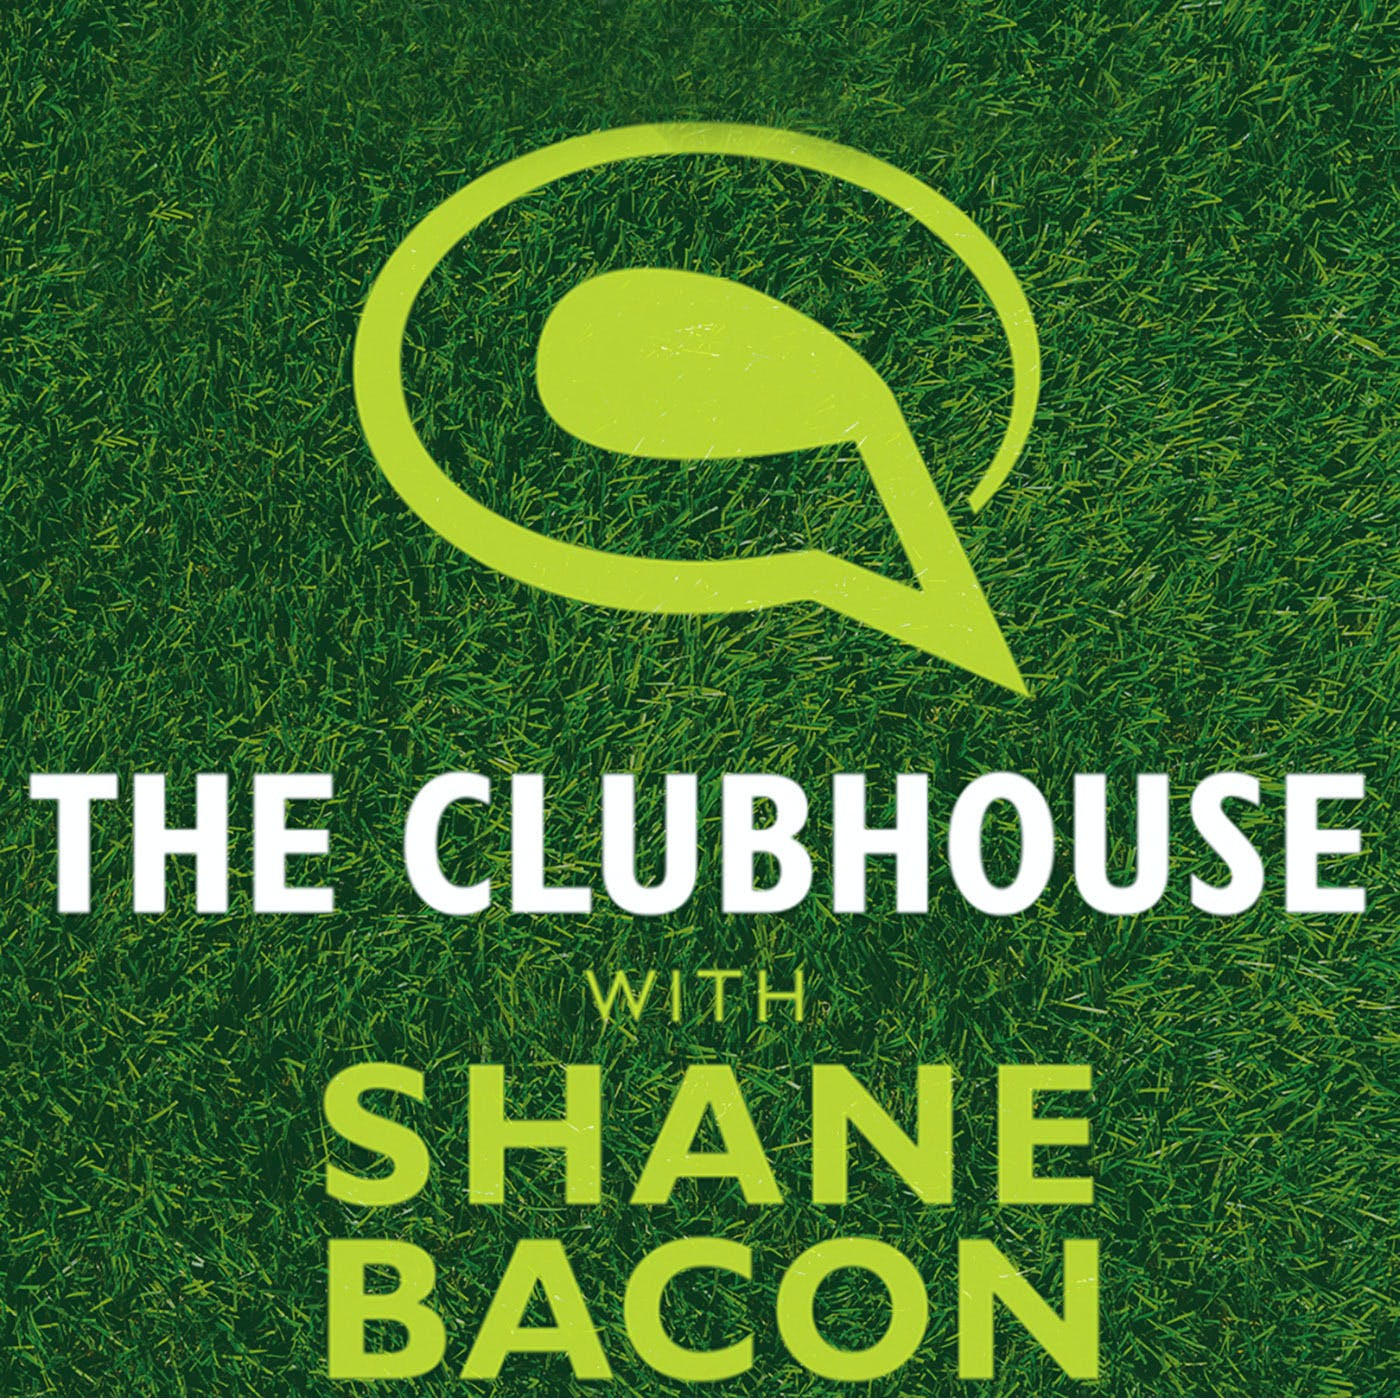 Ep. 69 - Paul Azinger on US Open & Tiger Woods